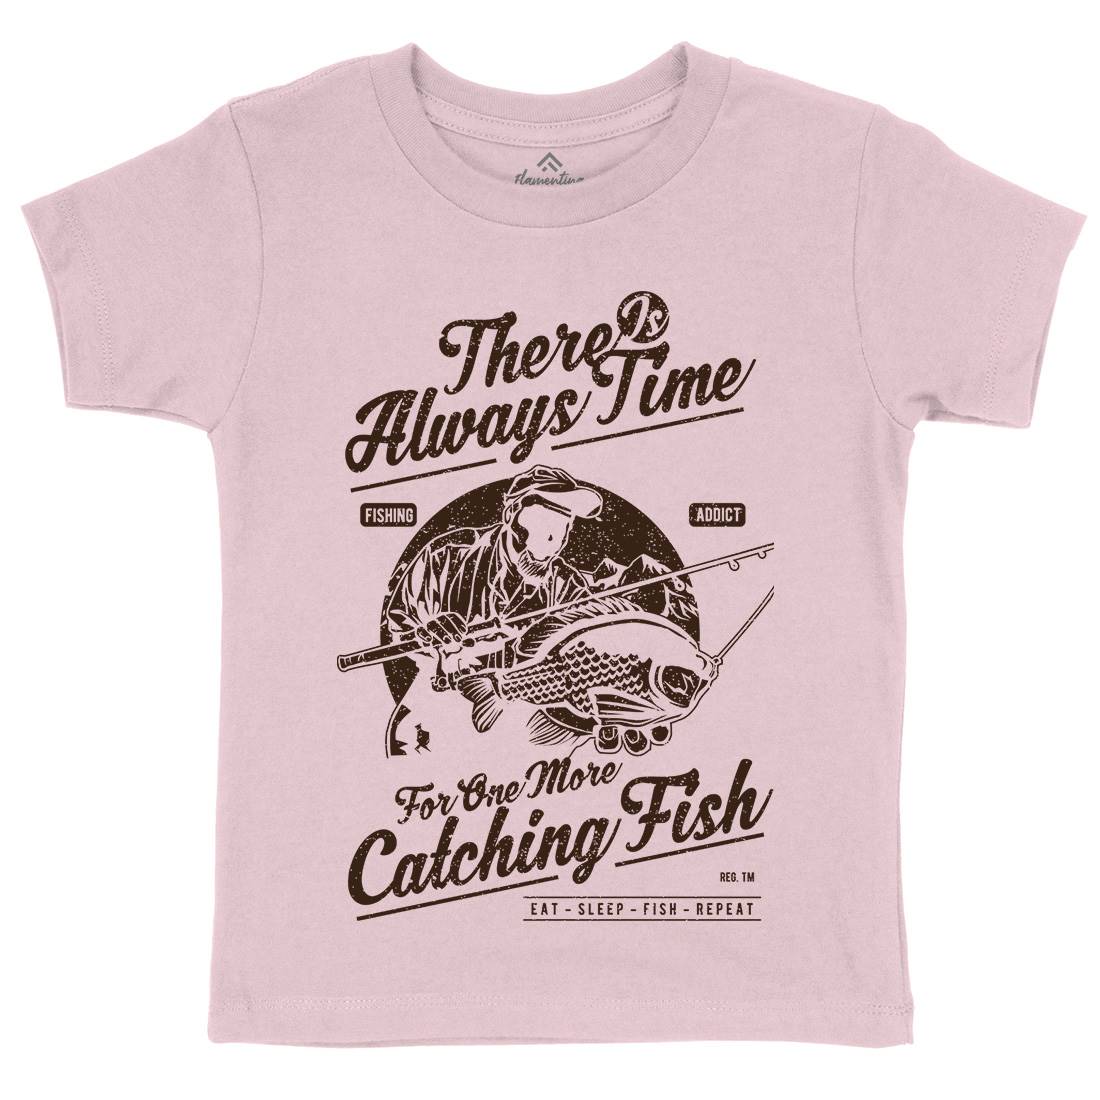 One More Catching Kids Crew Neck T-Shirt Fishing A731